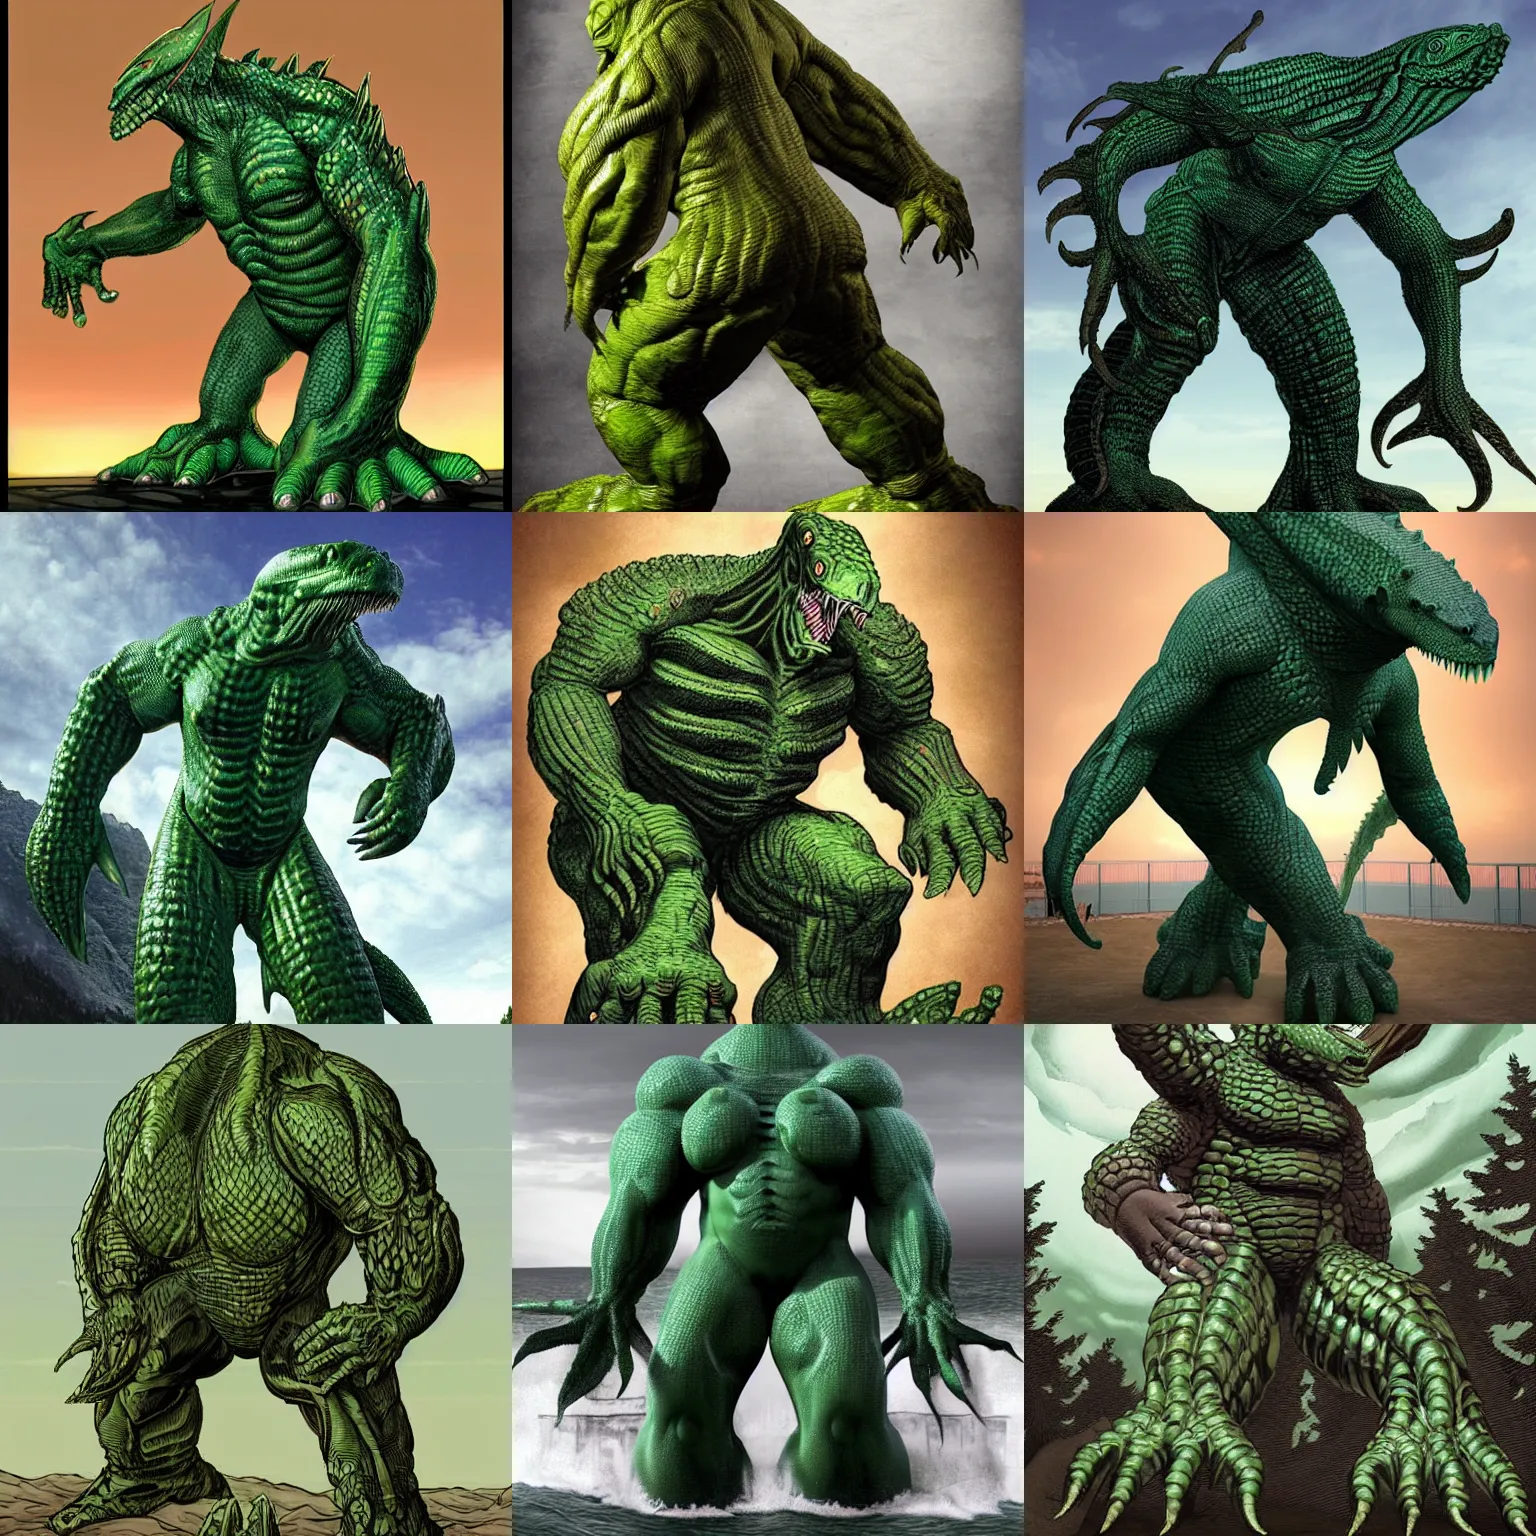 Prompt: Leviathan is thirty feet tall with a seemingly disproportionate body and scaly green skin. He has a top-heavy appearance due to his hunched shoulders and the large cords of muscles standing out on his neck, upper torso, and shoulders. The top-heavy appearance is only strengthened by his much thinner forearms and calves, topped off with massive claws and digitigrade feet. At the back of his body is a prehensile whip-like tail around 50 feet long. Leviathan weighs nearly nine tons. His face lacks any kind of mouth, nose, or ears, with the only features being four cracks containing glowing green orbs that resemble eyes. These eyes are placed asymmetrically, with three on the left side of the face and one on the right. At some point, Leviathan seemingly developed a fifth eye. This eye appeared due to battle damage.When walking on two legs he sways his upper body back and forth in sync with the swaying of his arms, using his tail for balance. However he is far more balanced and significantly faster once on all fours, fast enough to run on the surface of the water. He leaves an \'afterimage\' of water whenever he moves, equivalent to the volume of whatever body part is in motion, perpetually shrouding him in water.